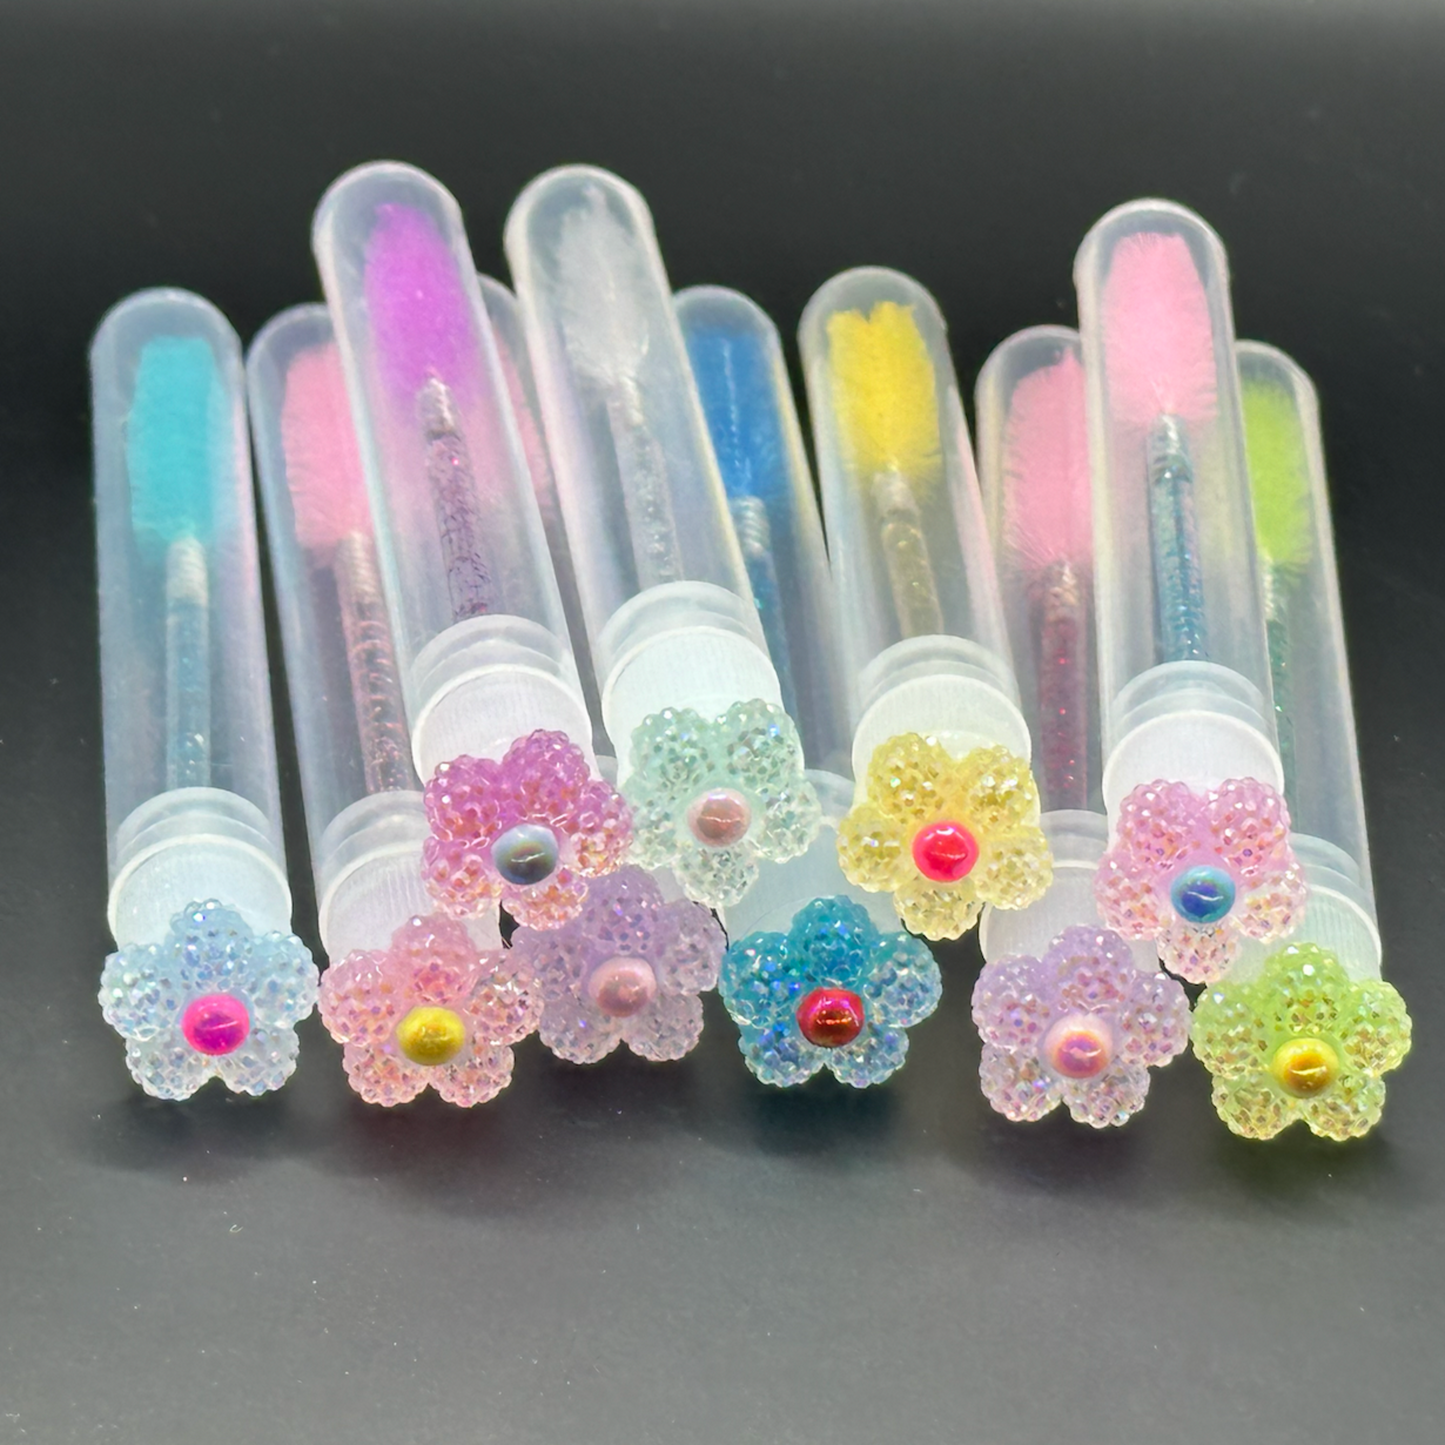 Regular Eyelash Wands with Cover - Sparkly Flowers